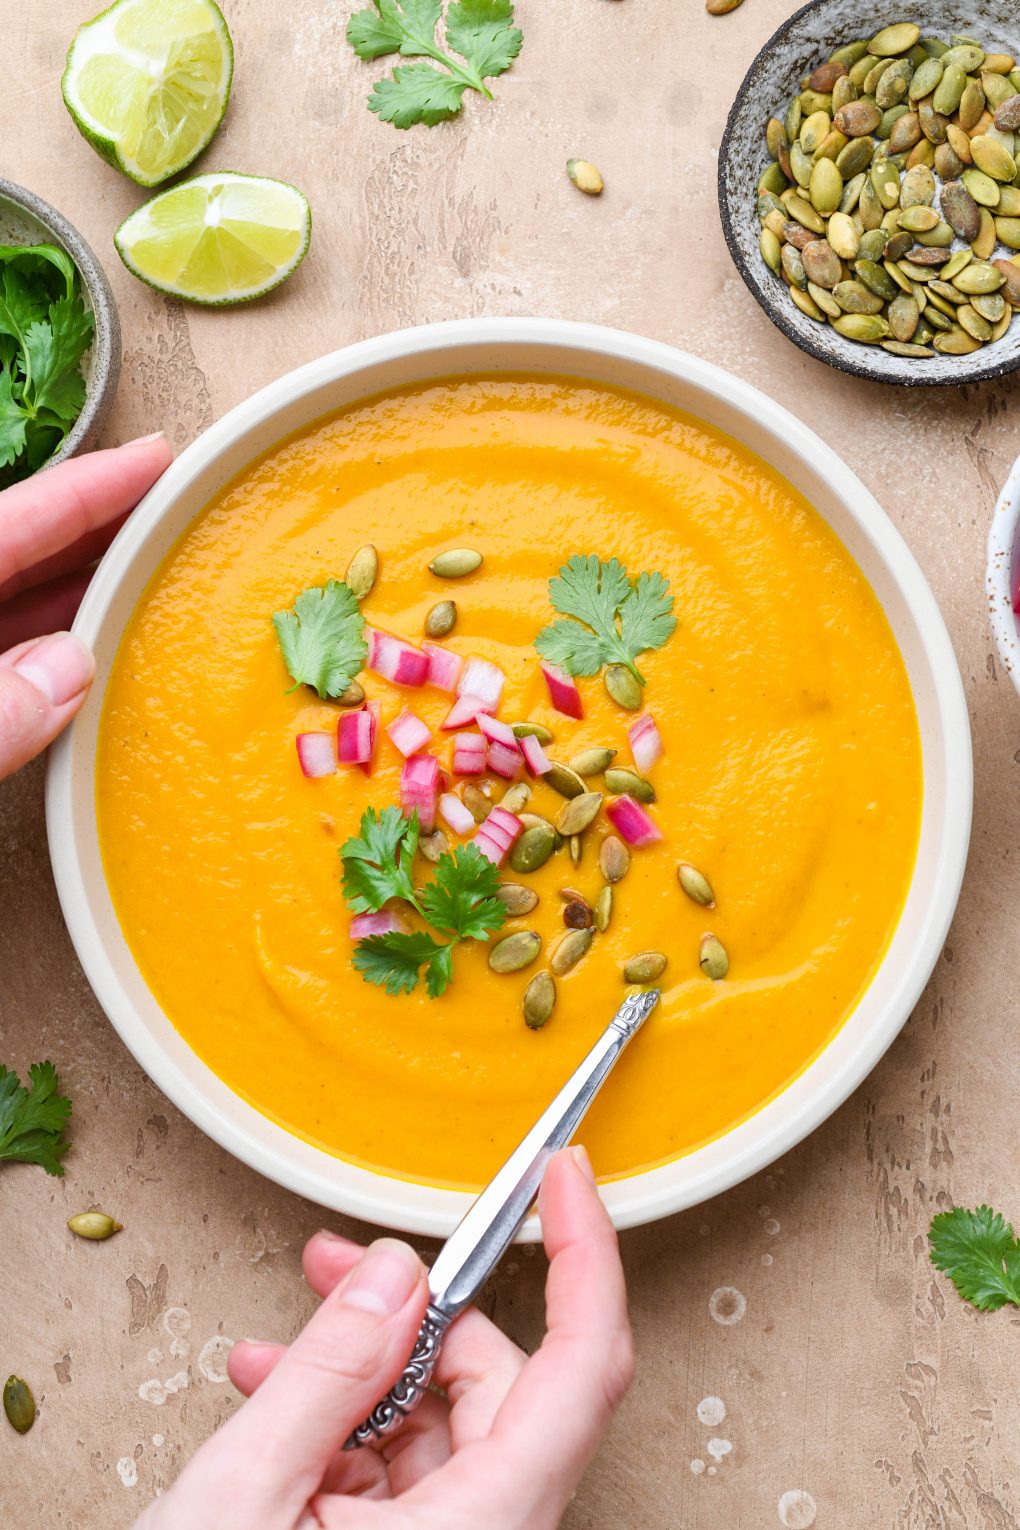 Large wide bowl of bright orange creamy carrot soup on a light brown background. Soup is topped with fresh cilantro leaves, chopped pickled red onions, and pumpkin seeds. Hands are reaching in to grab the spoon and bowl.